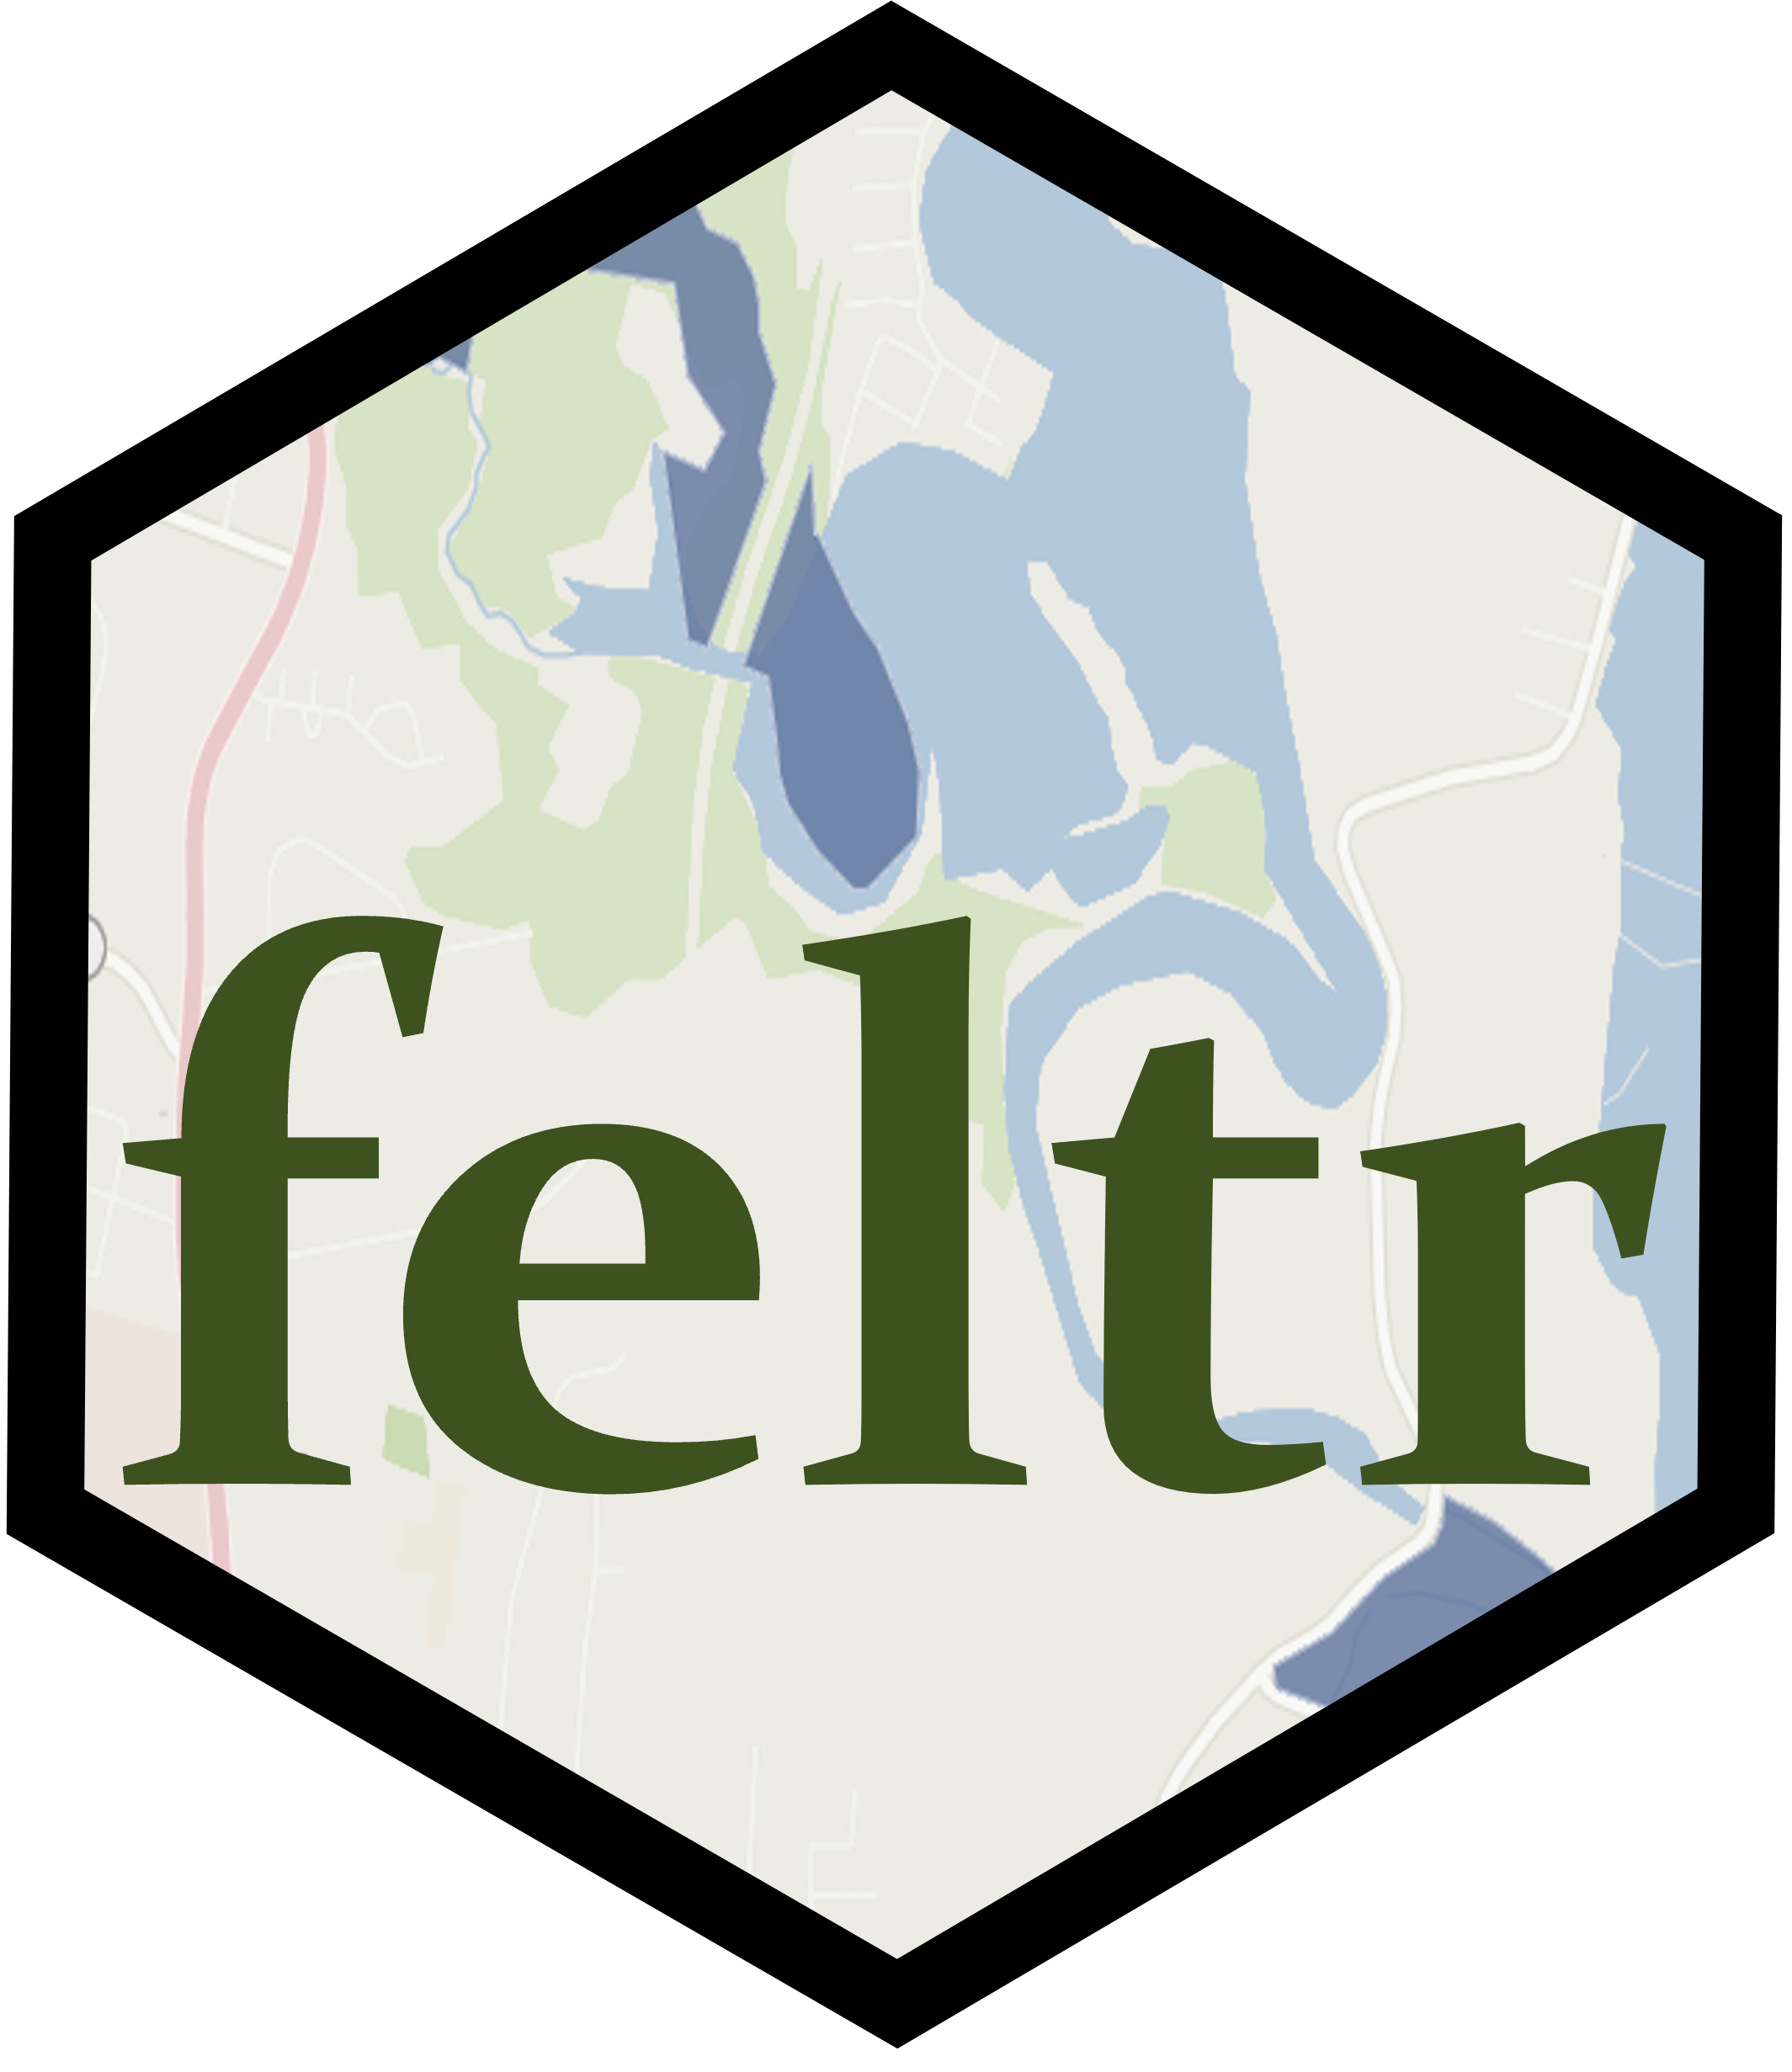 A hexagonal logo for the R package Feltr with the word feltr in the foreground and a small map in the background.